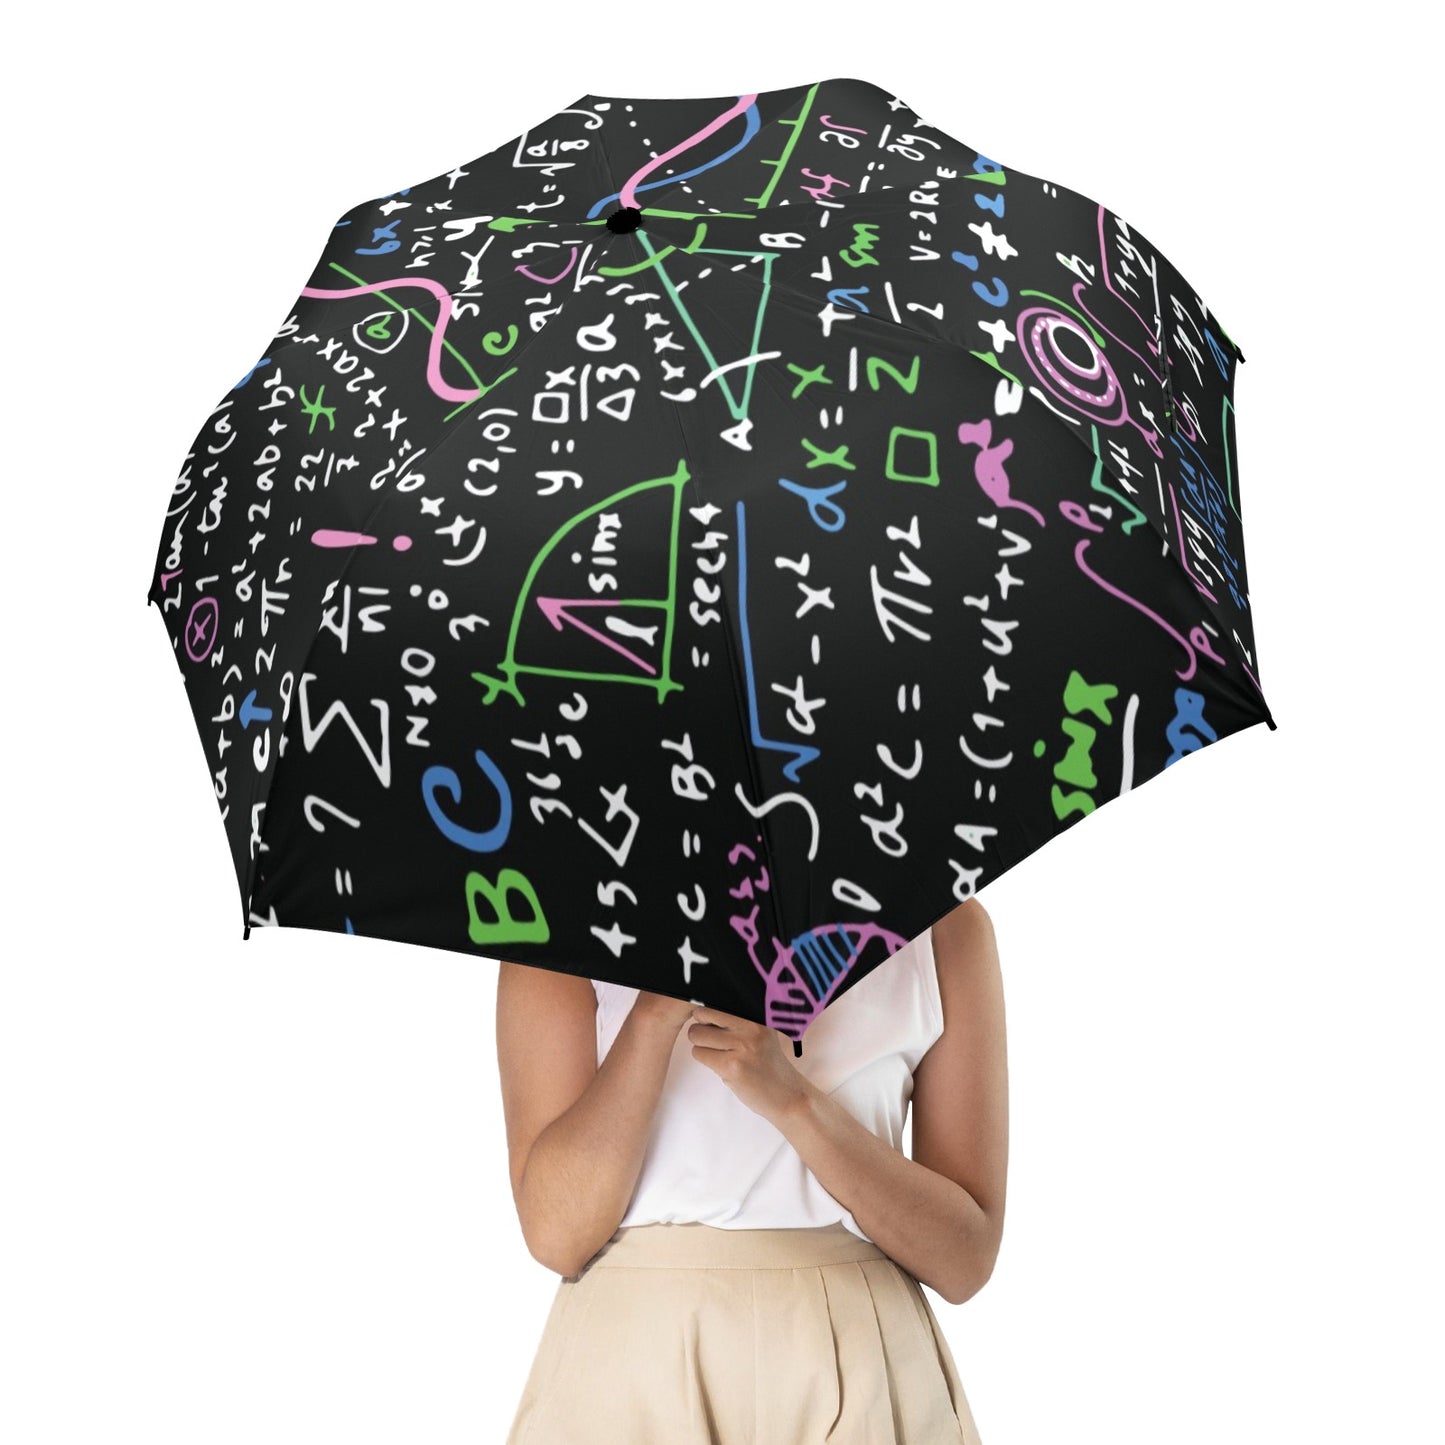 Equations In Green And Pink - Semi-Automatic Foldable Umbrella Semi-Automatic Foldable Umbrella